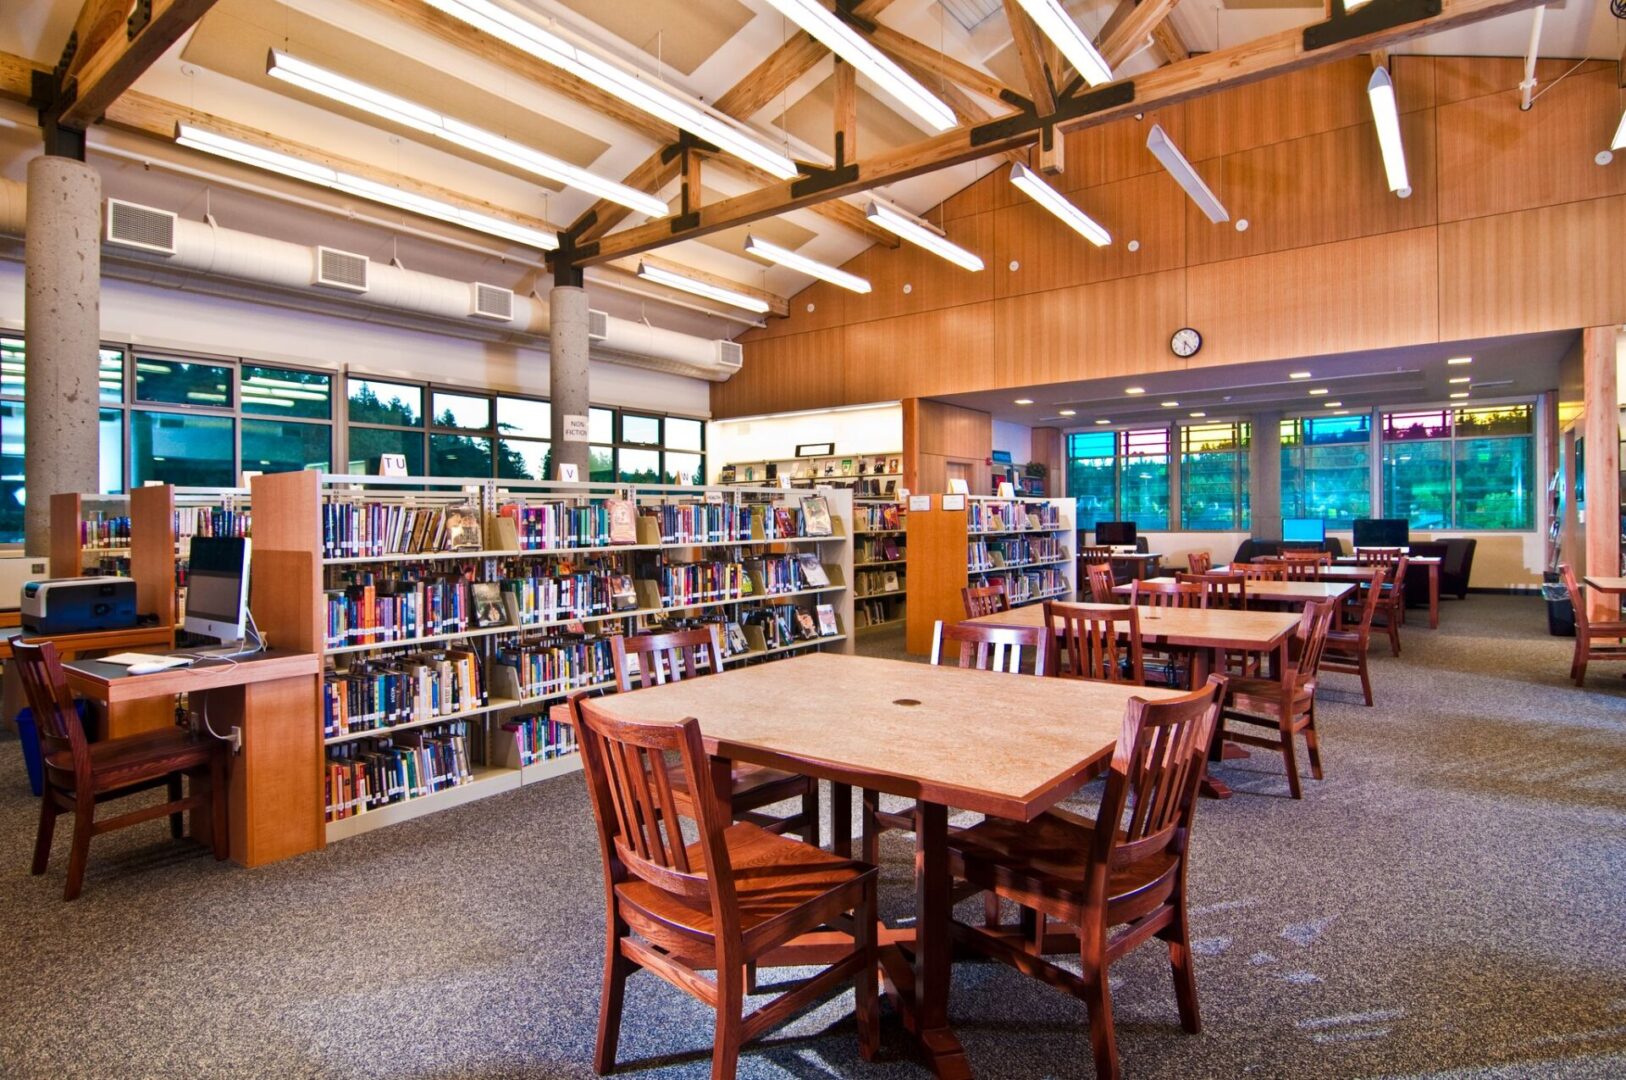 A Library Area With Stacks of Books in Shelves